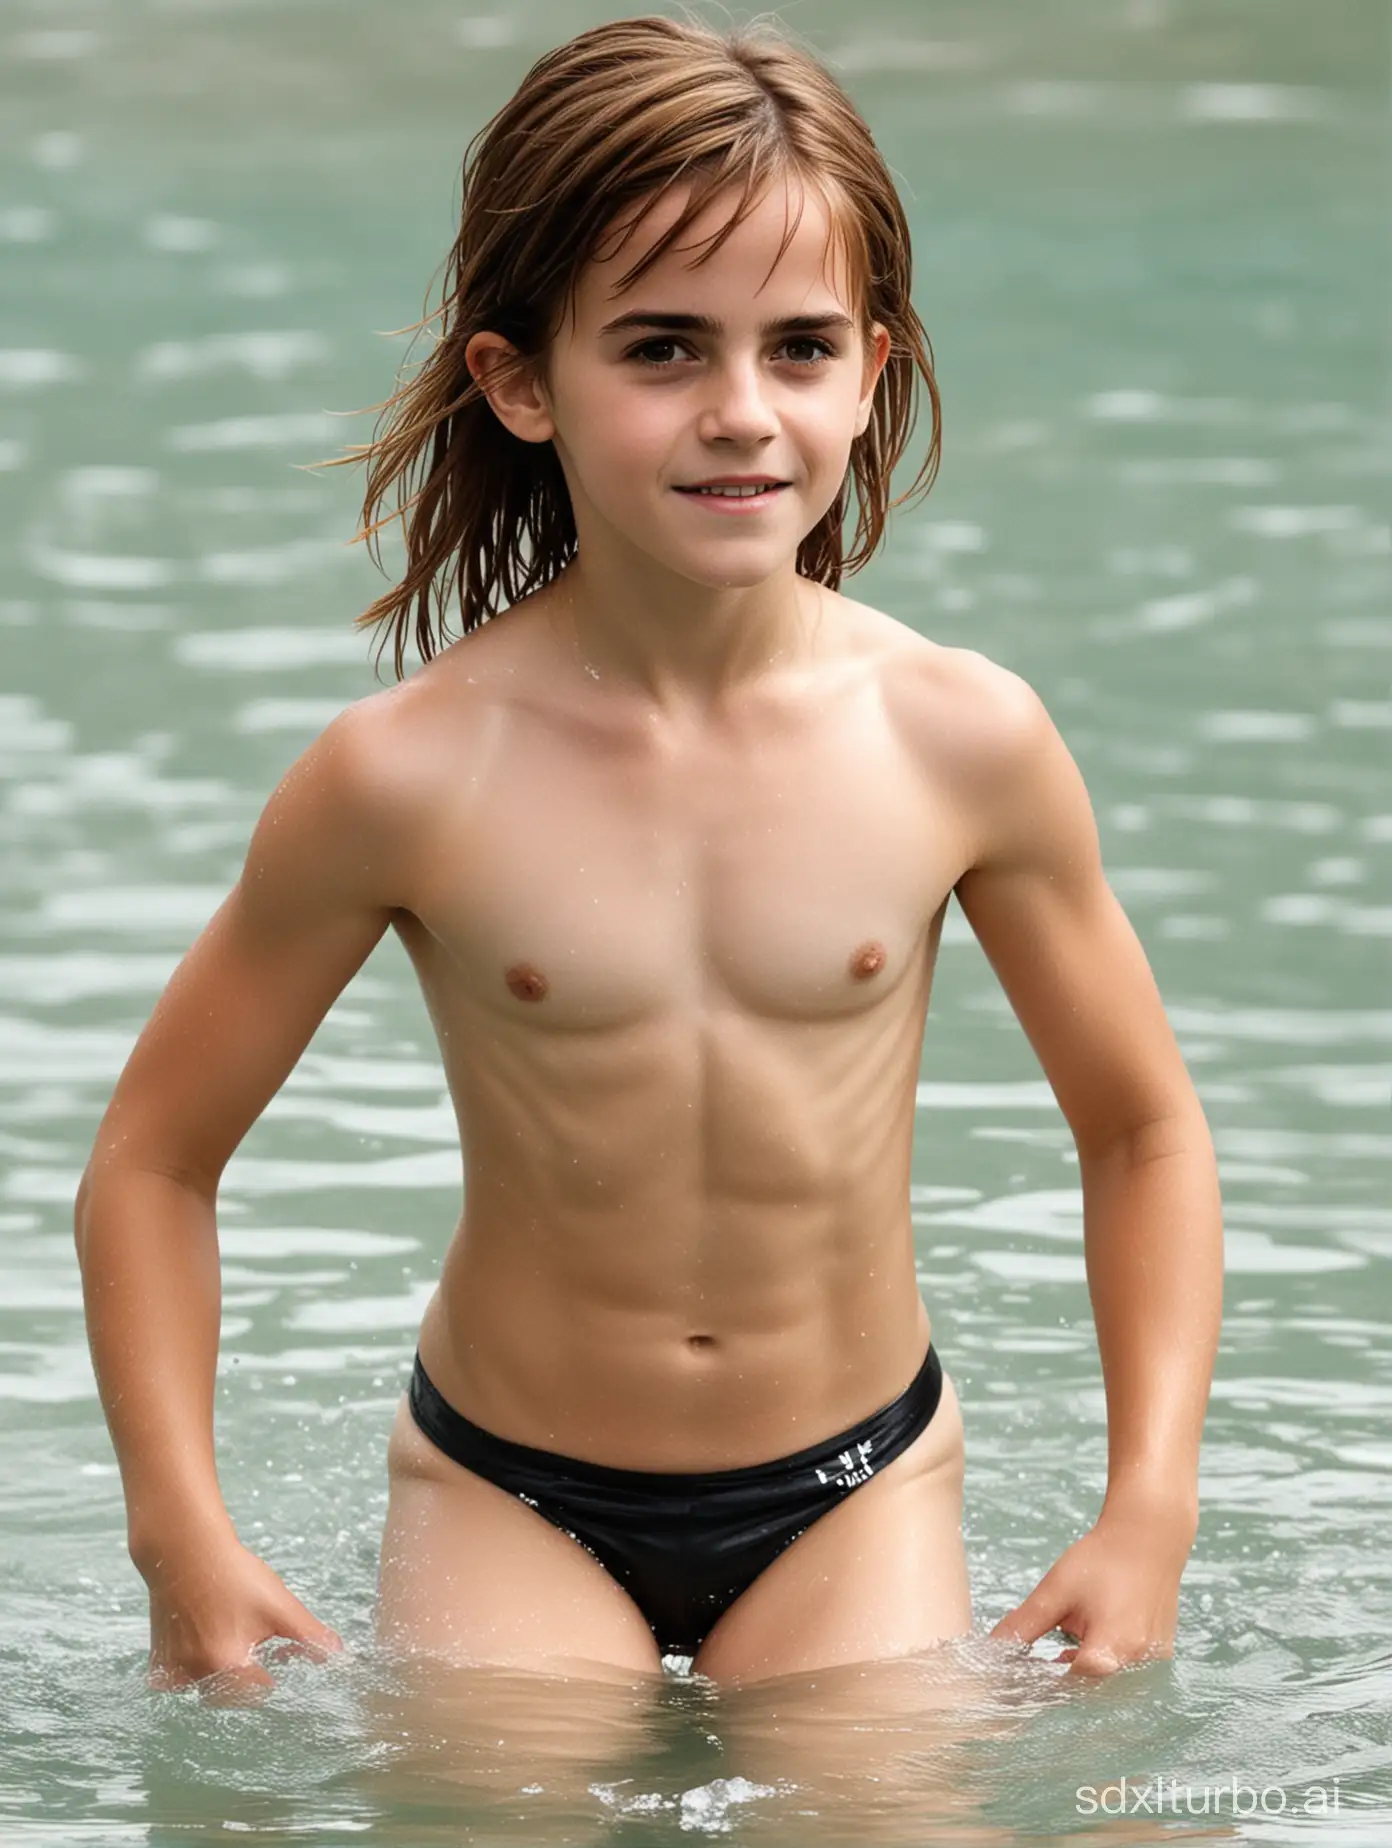 Emma Watson at 7 years old, very muscular abs, bathing